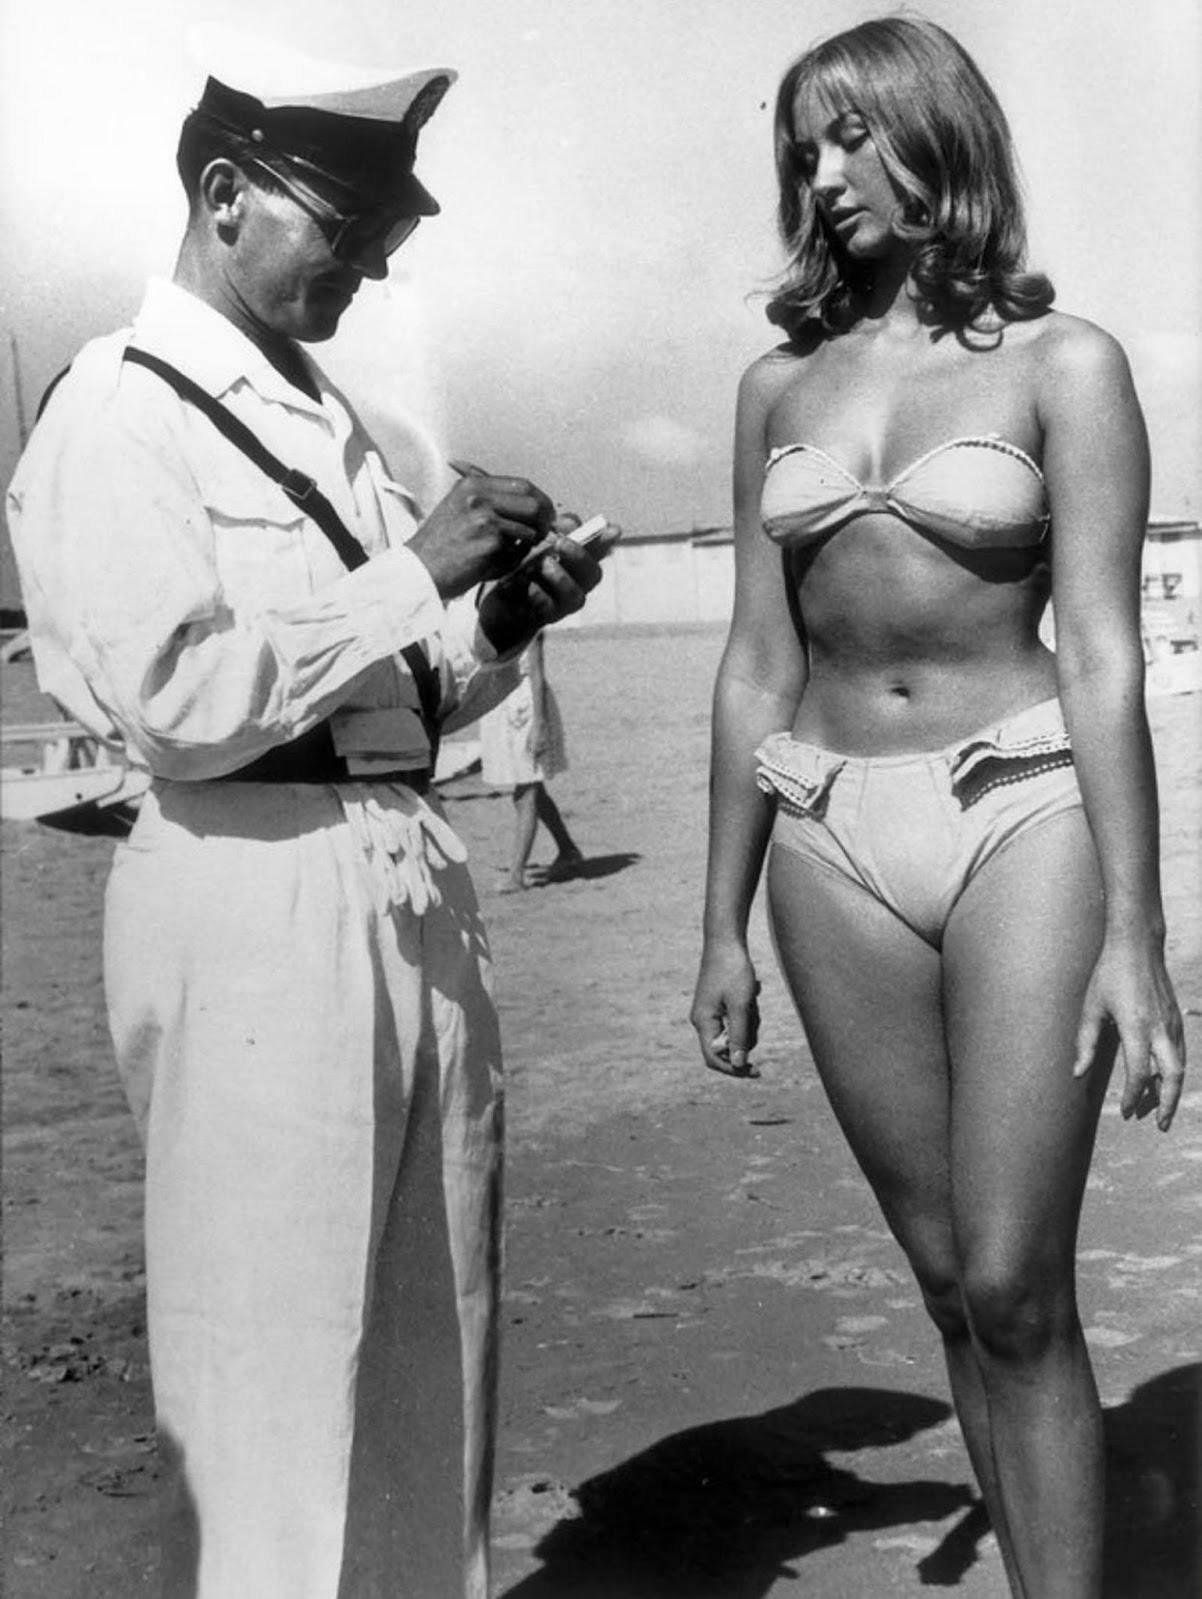 A police officer issuing a woman for wearing a bikini on the beach in 1957 Italy.